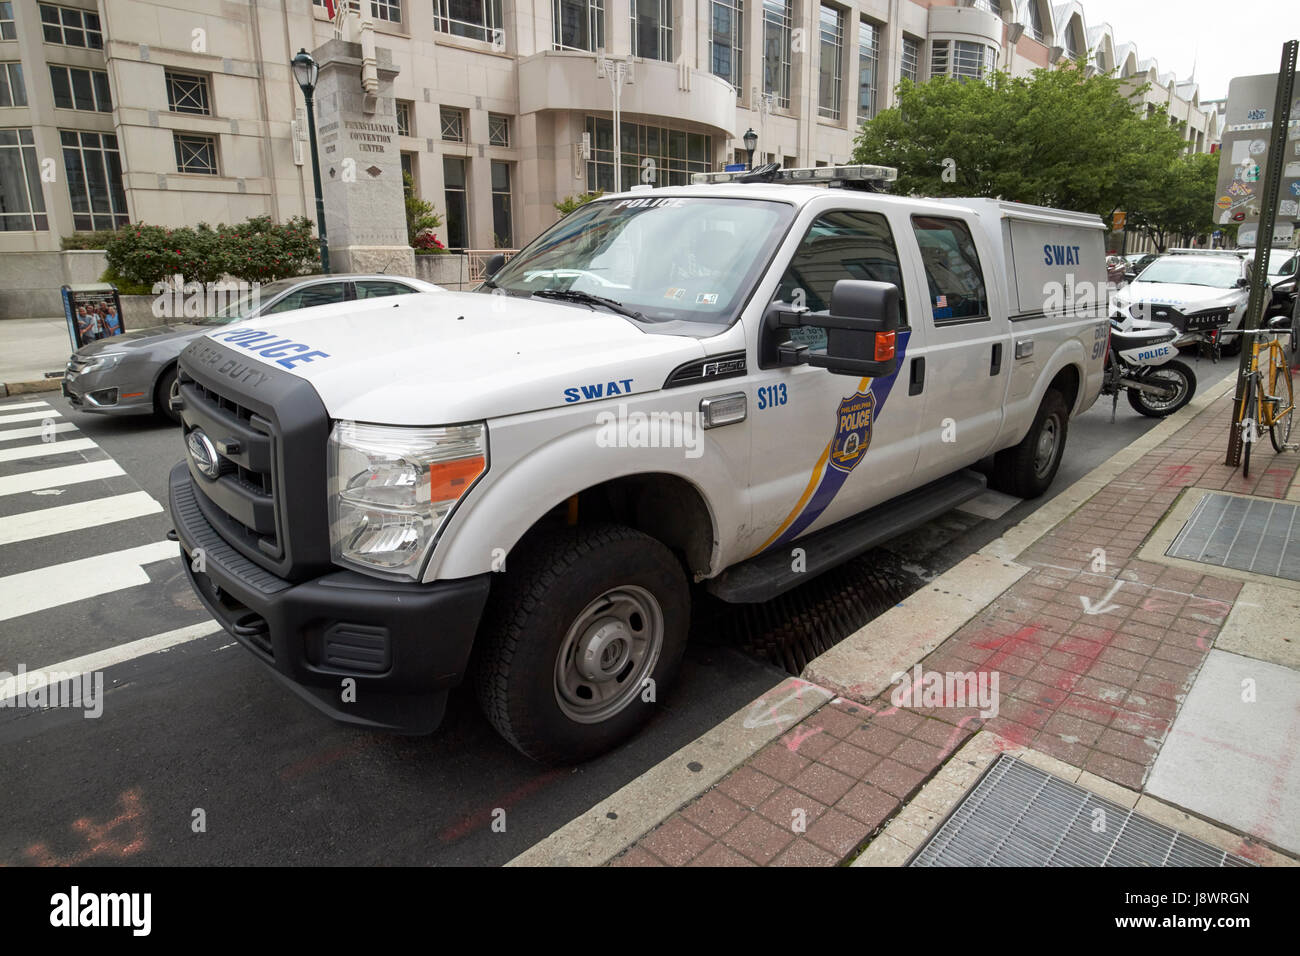 Philadelphia police swat ford truck vehicle USA outside the convention center Stock Photo